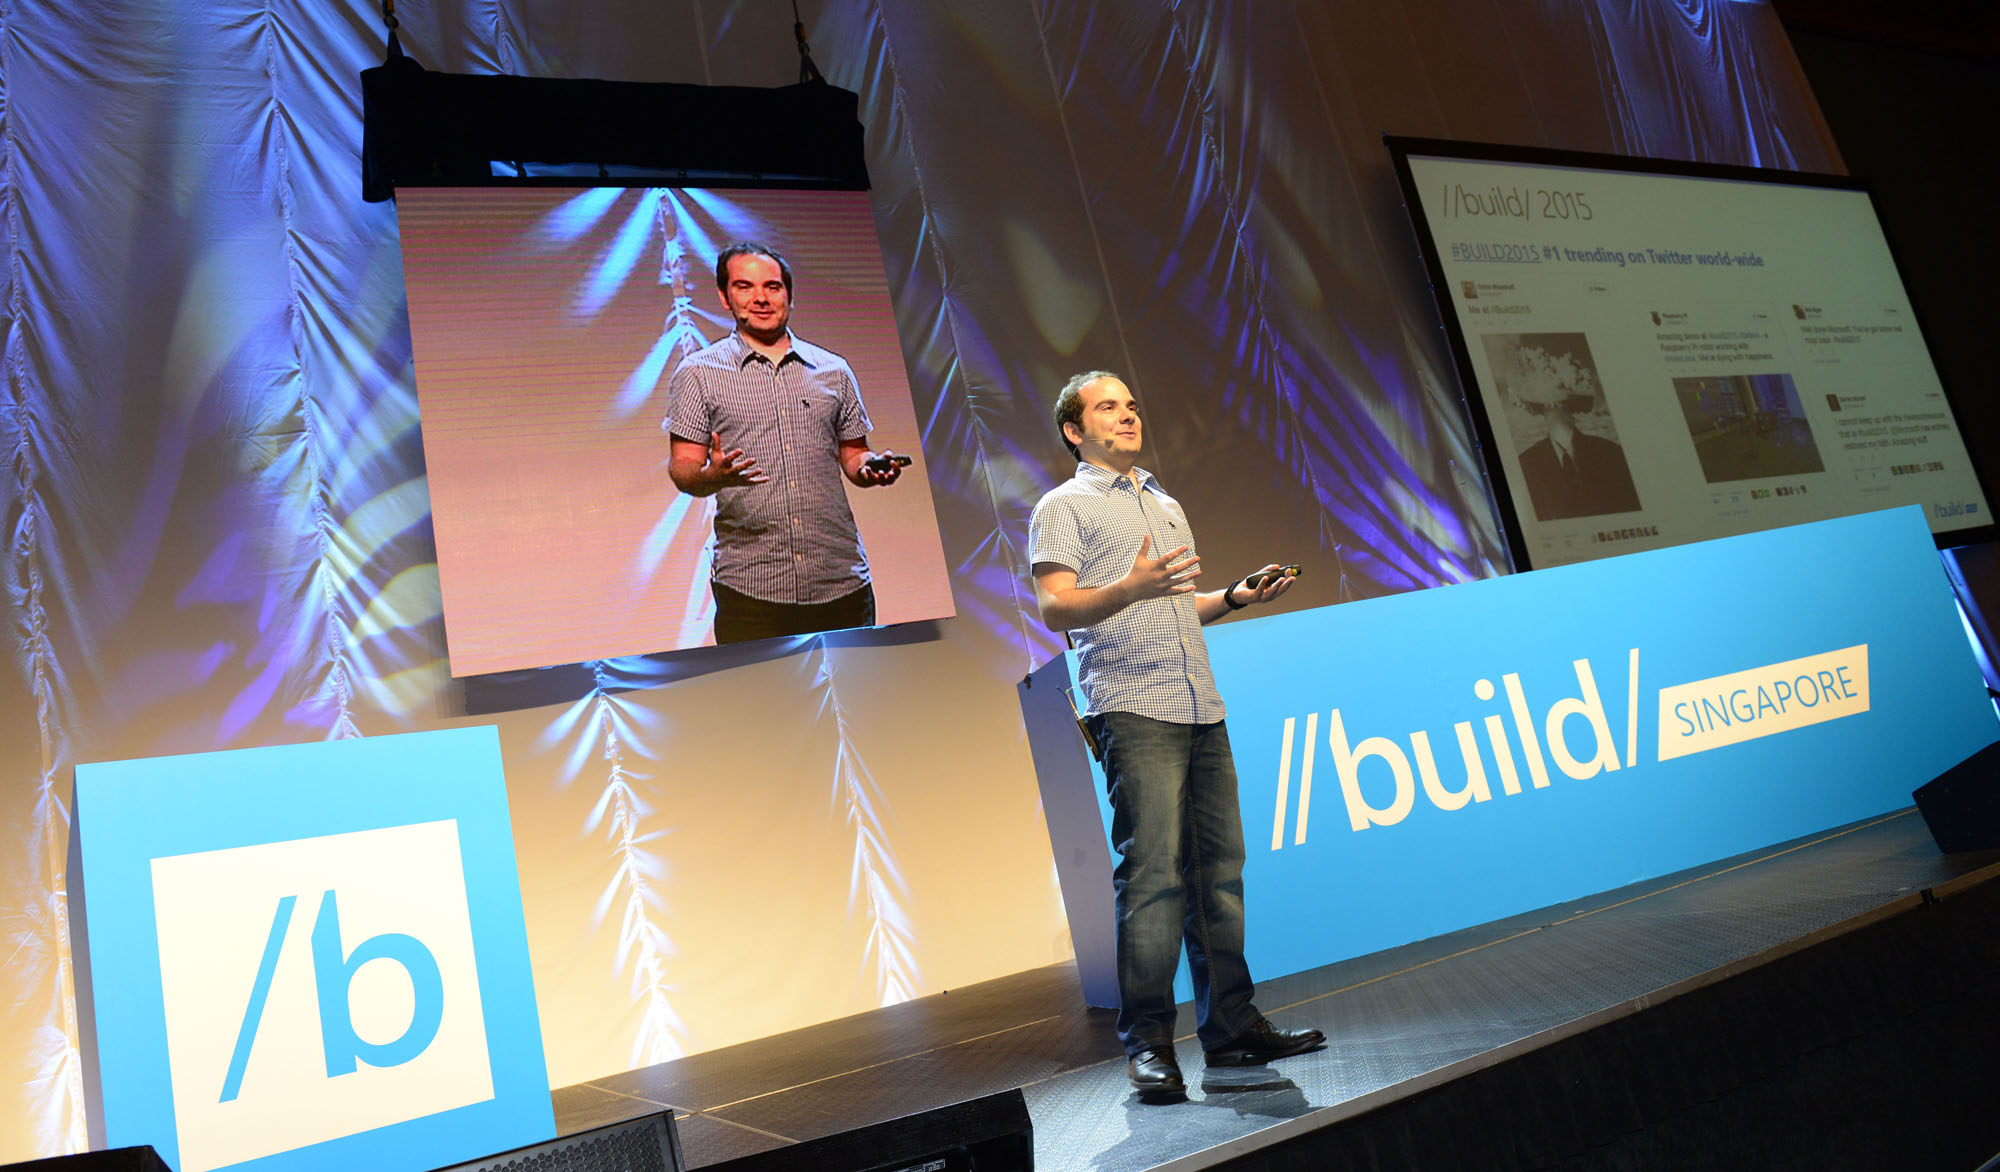 Giorgio Sardo, Senior Director of the Developer Experience and Evangelism Group in Microsoft, was the main keynote speaker at the Build Conference in Singapore.